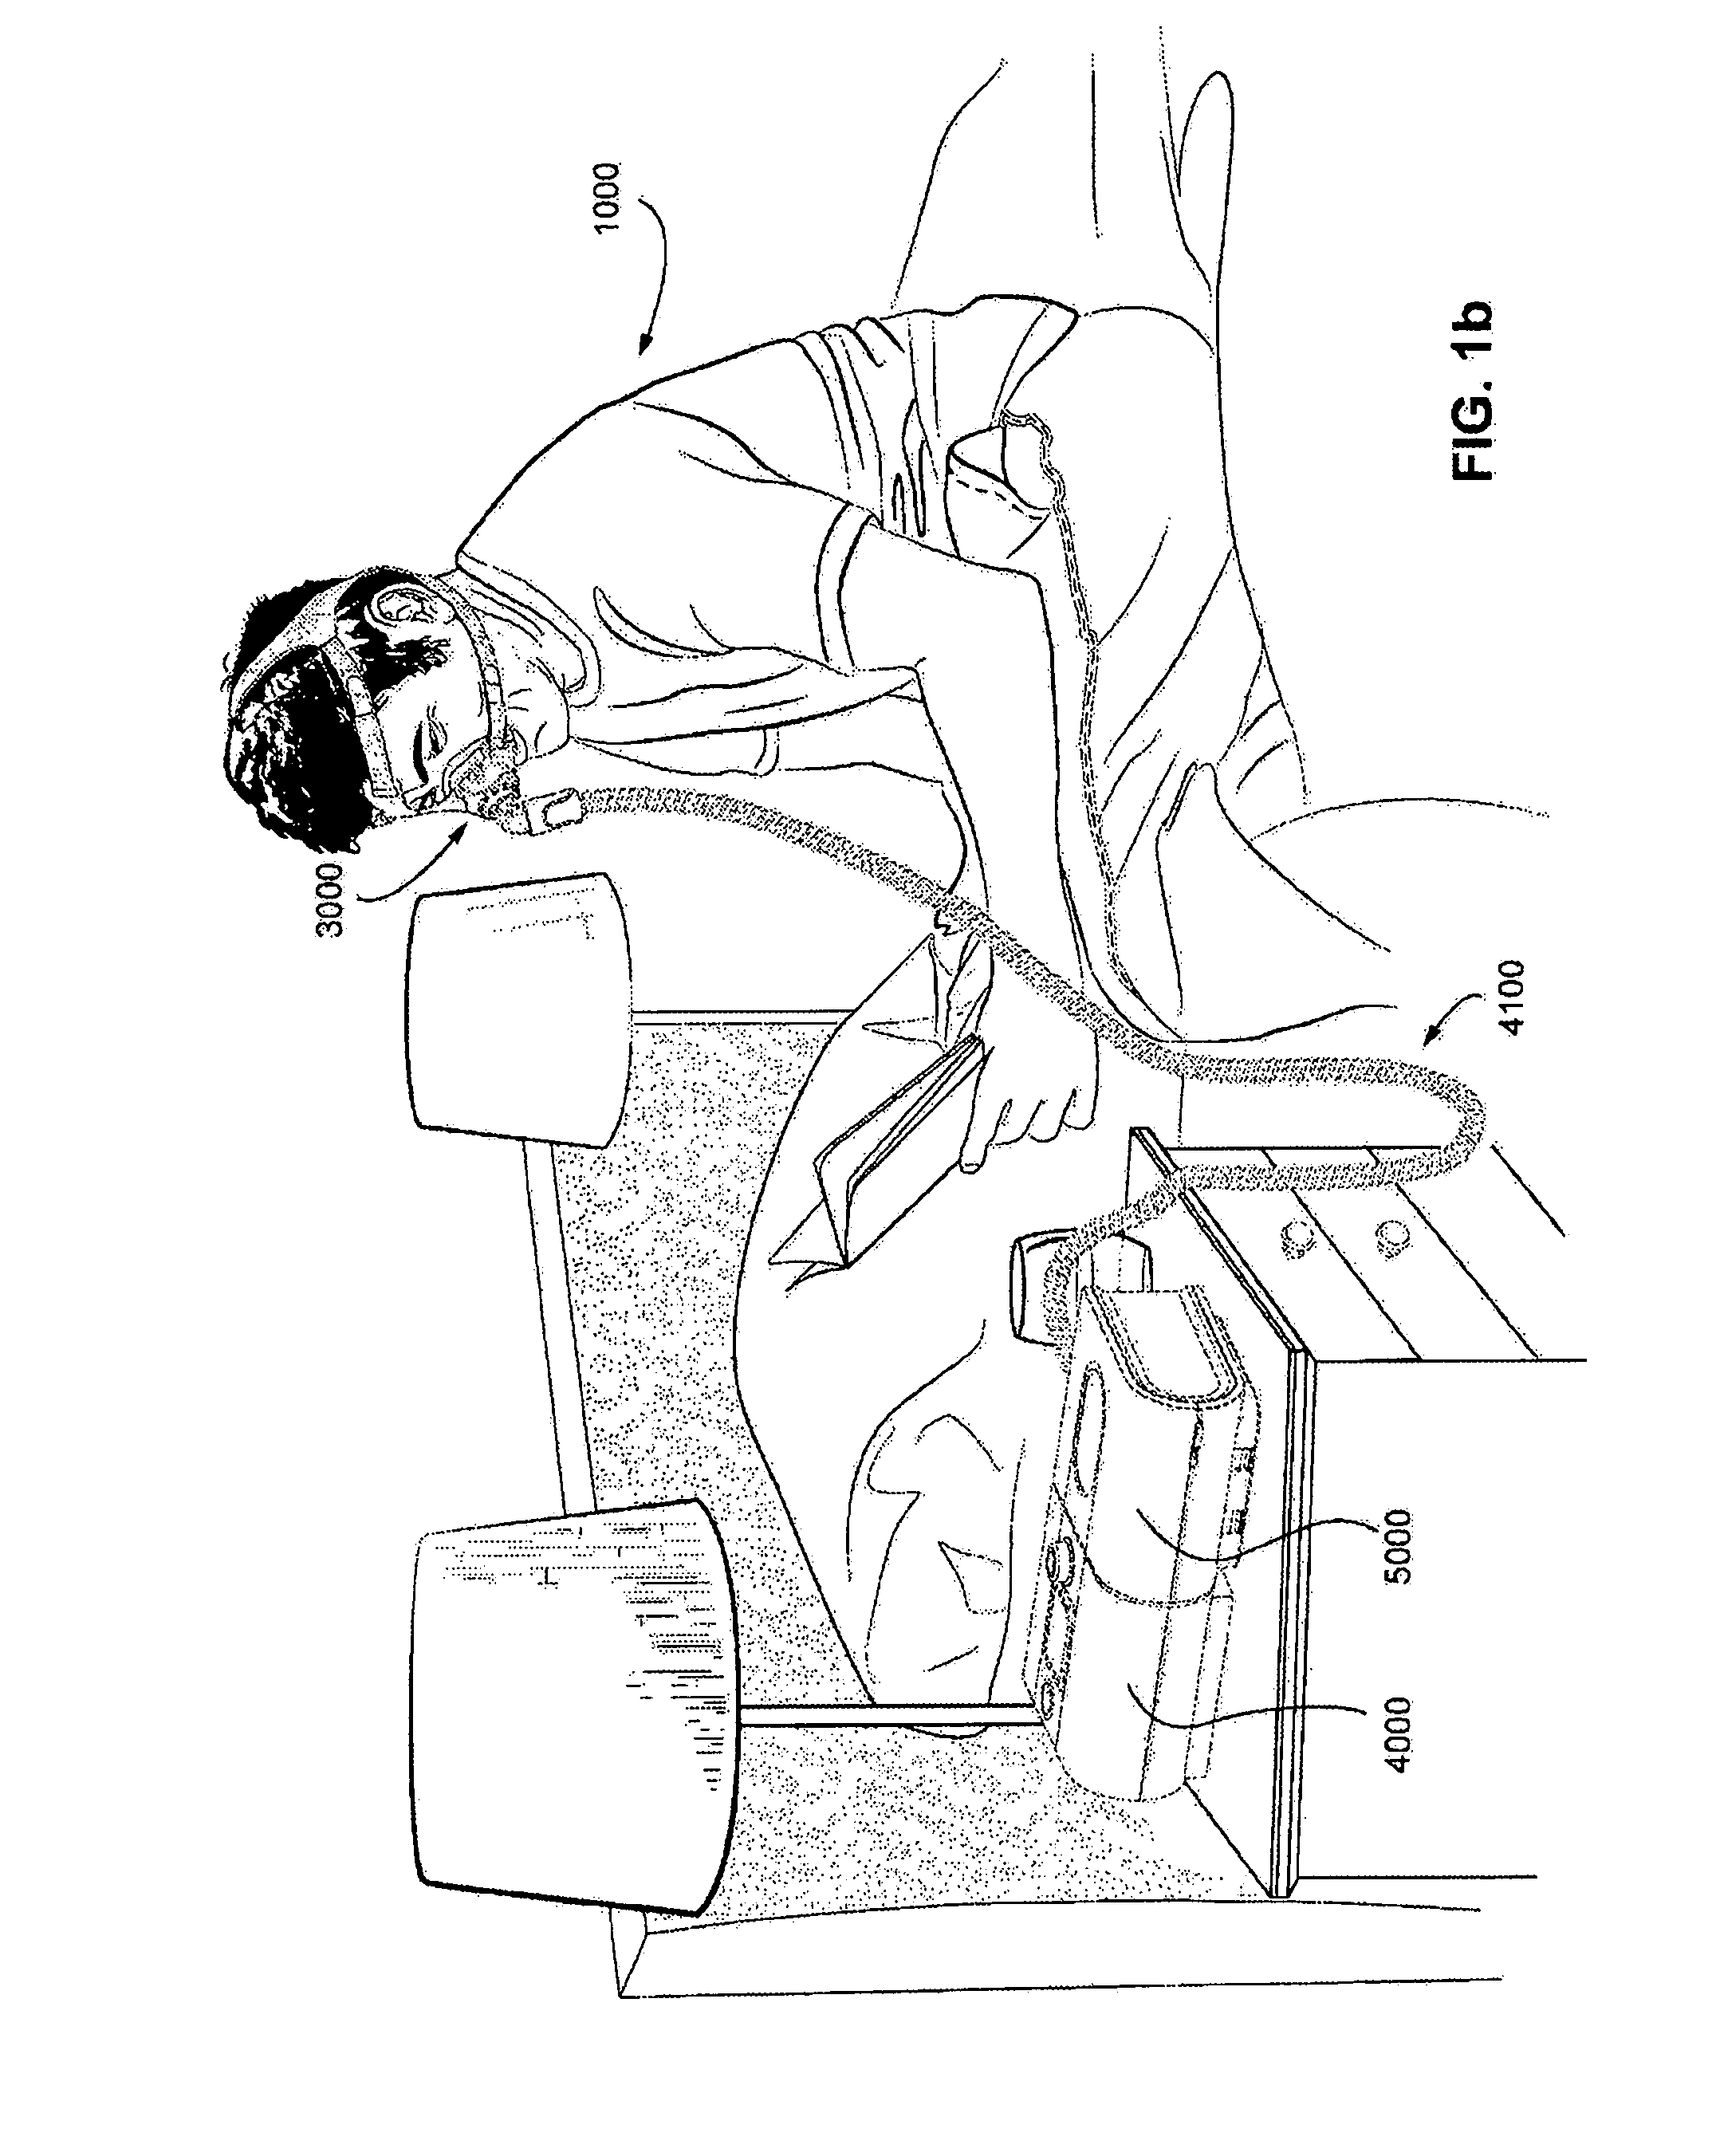 Outlet connection assembly and method of making the same